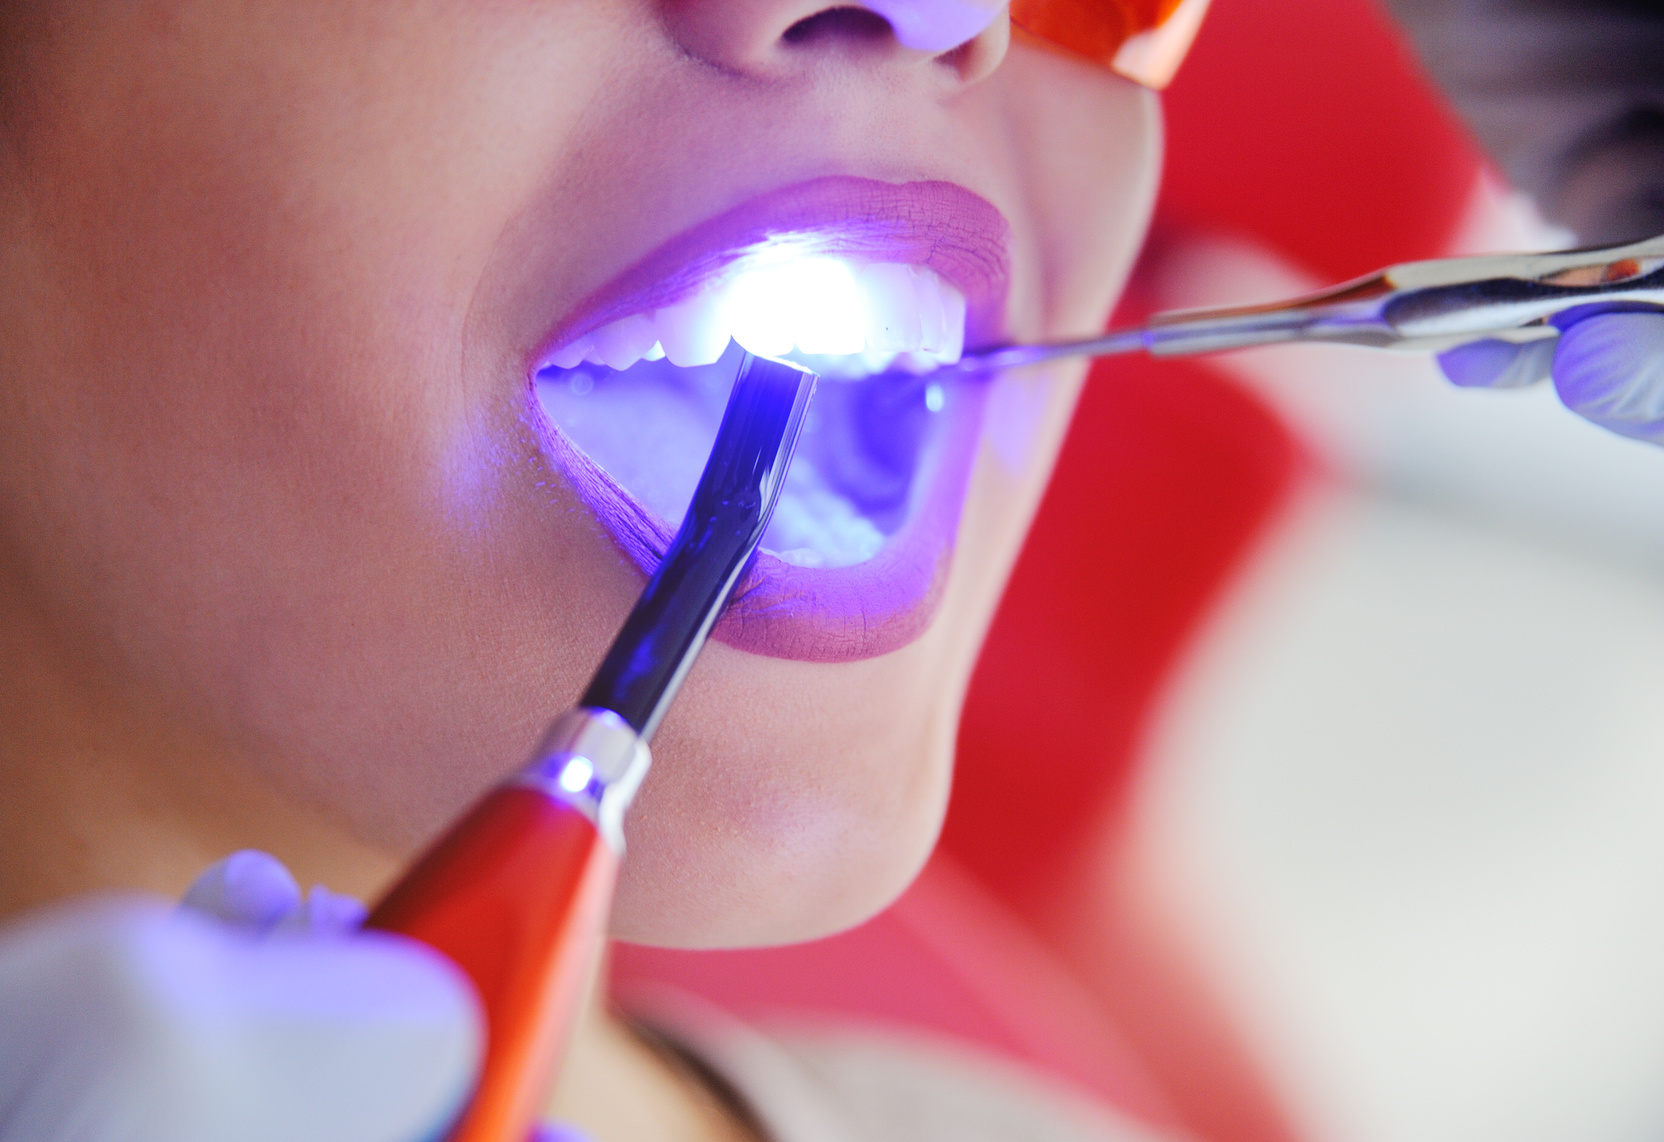 How ‘Long in the Tooth’ Can a Tooth Filling Get?